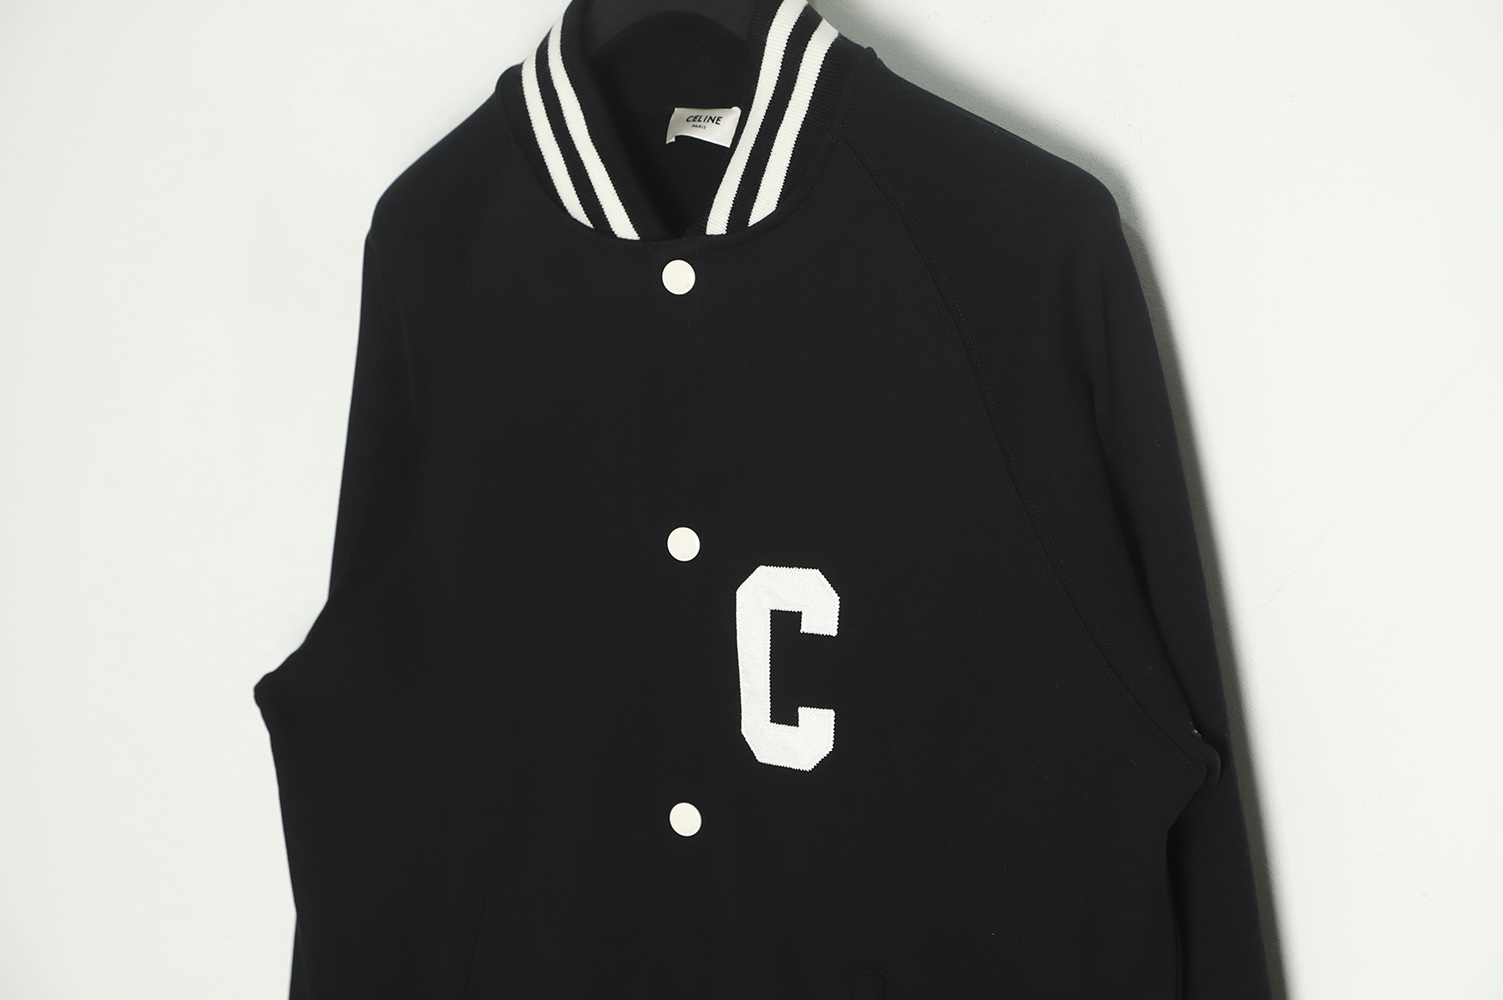 Celine 22FW Towel Embroidered Letters Baseball Jersey